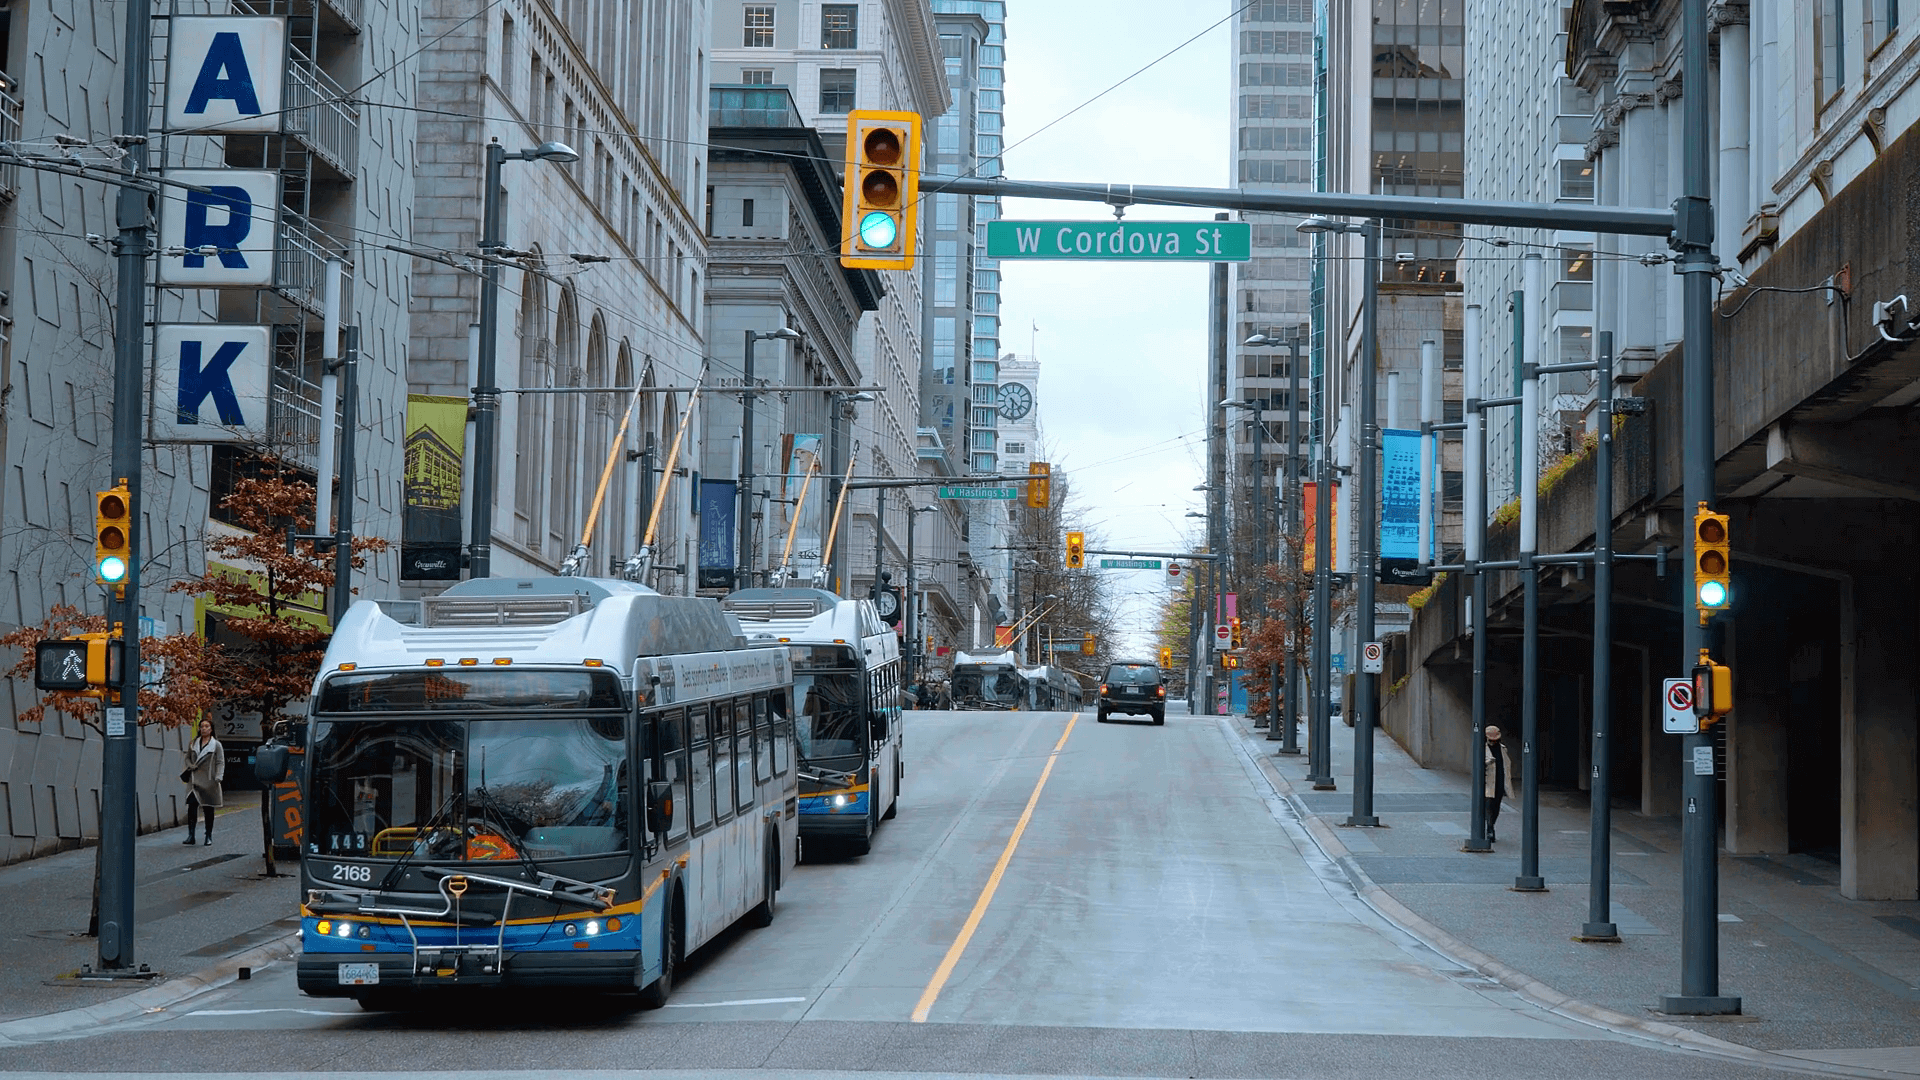 West Cordova Street embraces the powers of truck ads